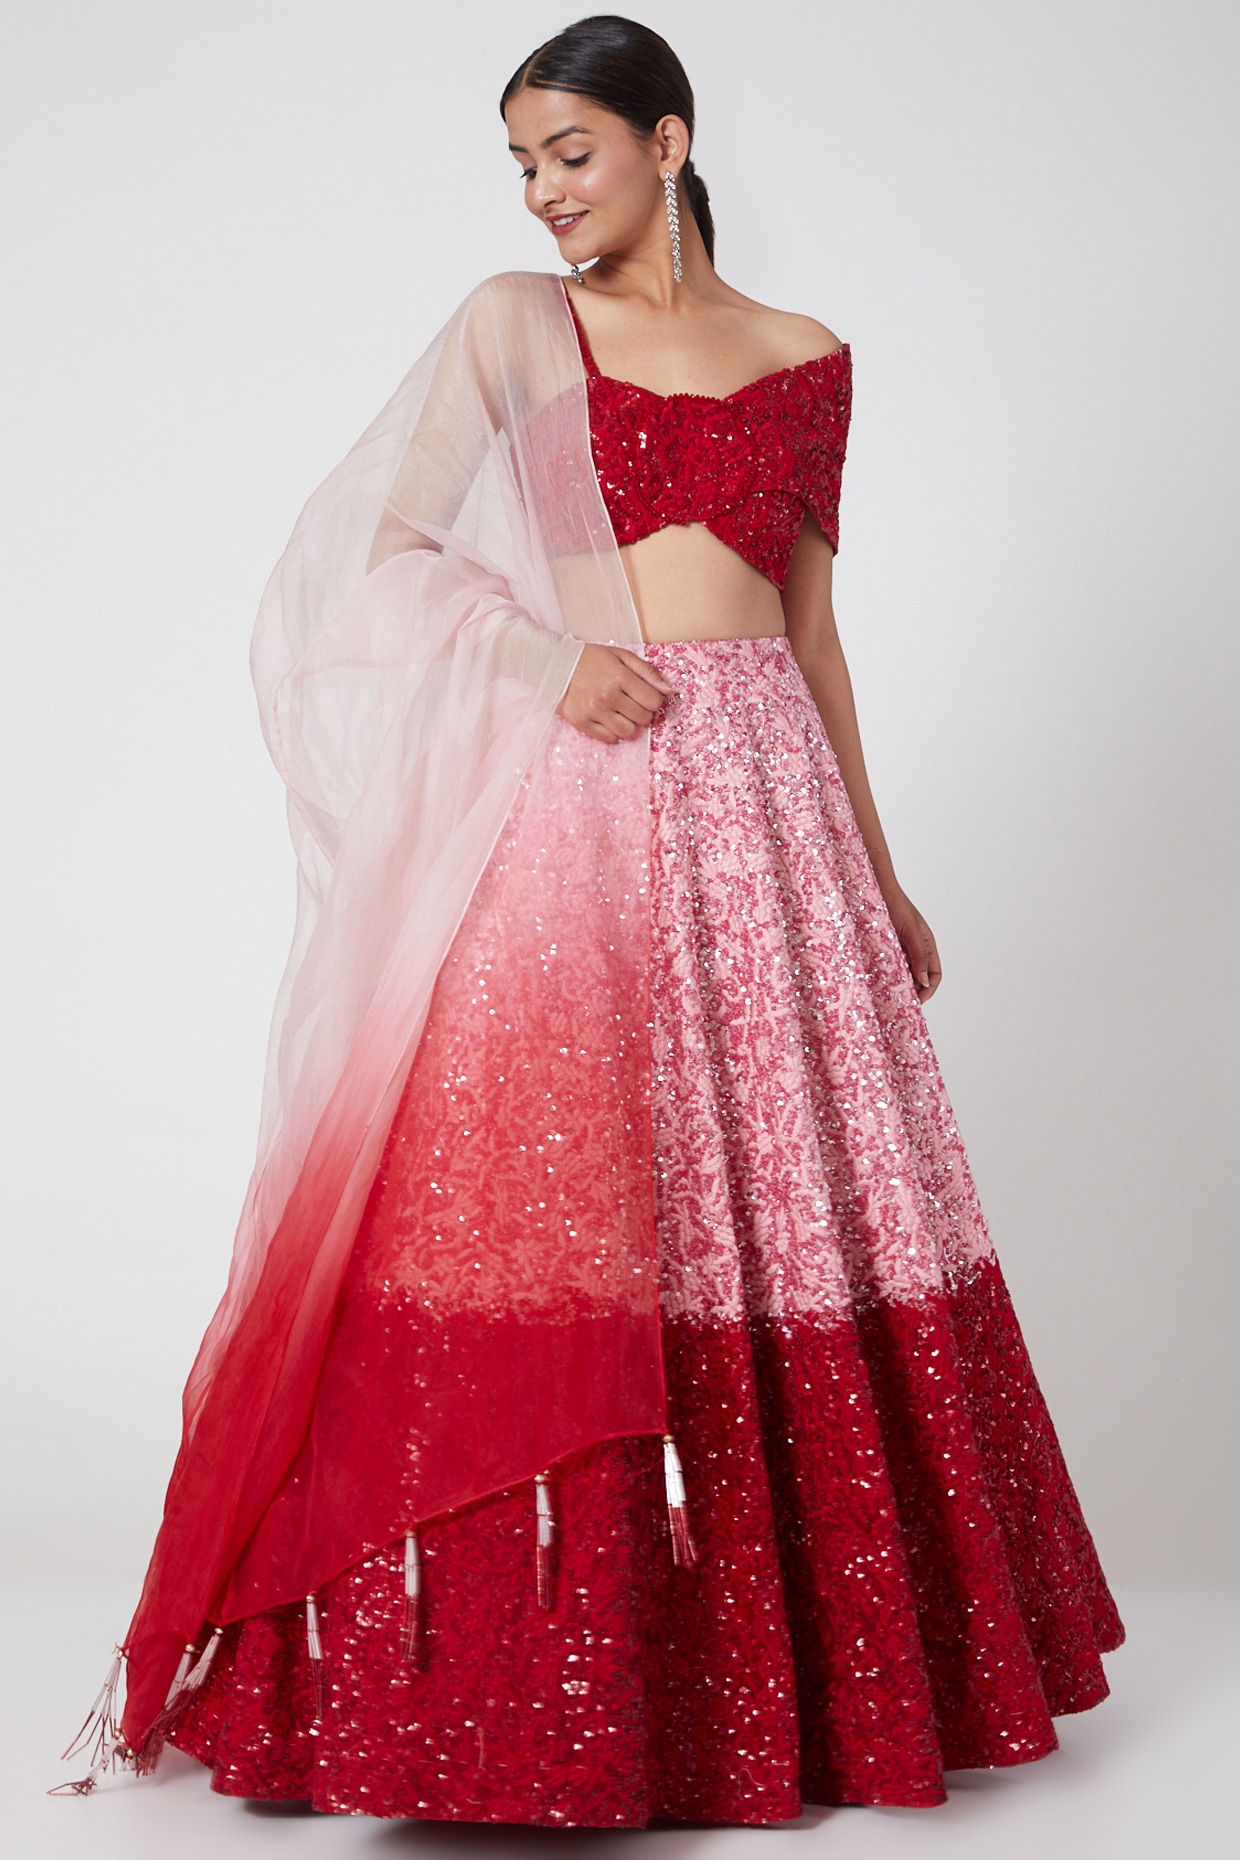 Bridal Lehengas : Pink floral embroidery on pink base art ...